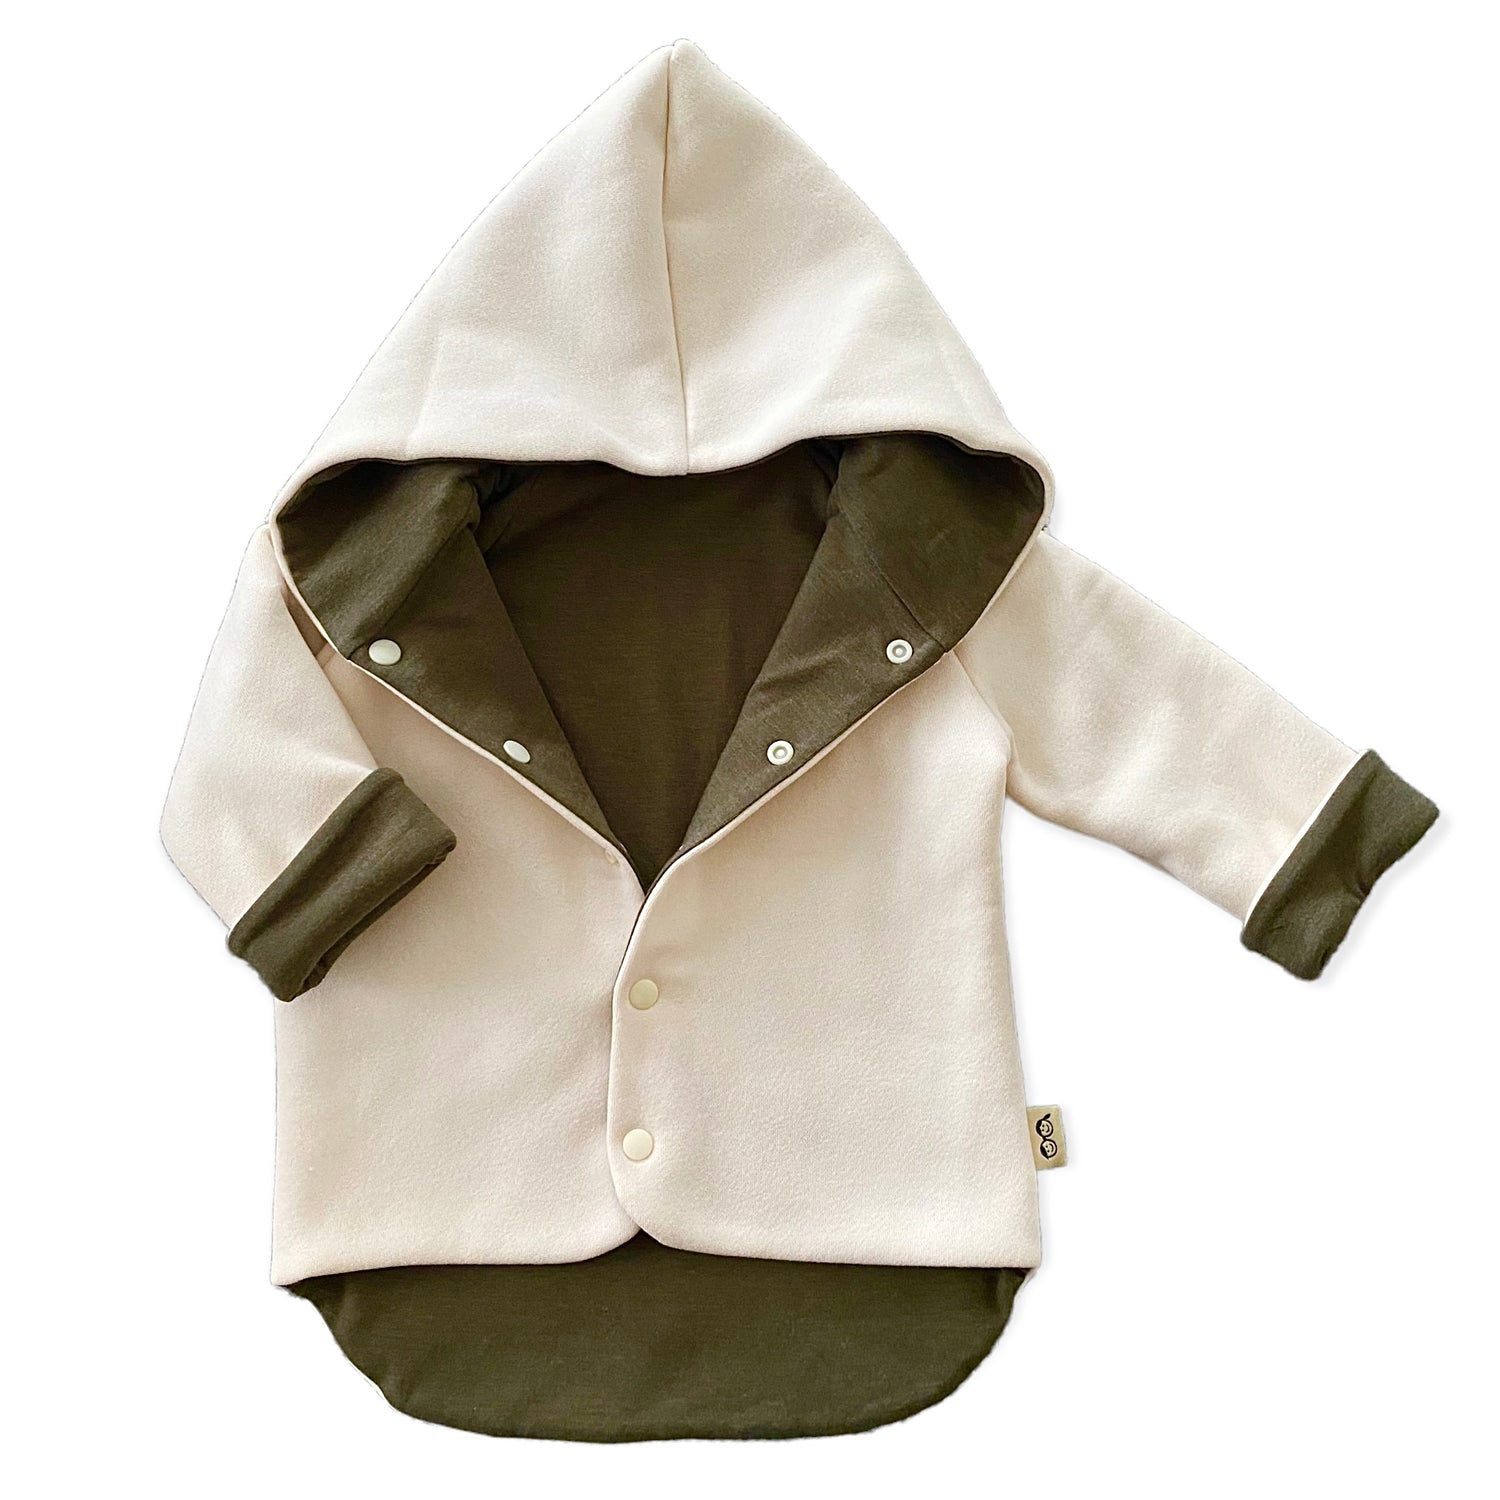 Barely Beige and Heather Olive Hooded Jacket